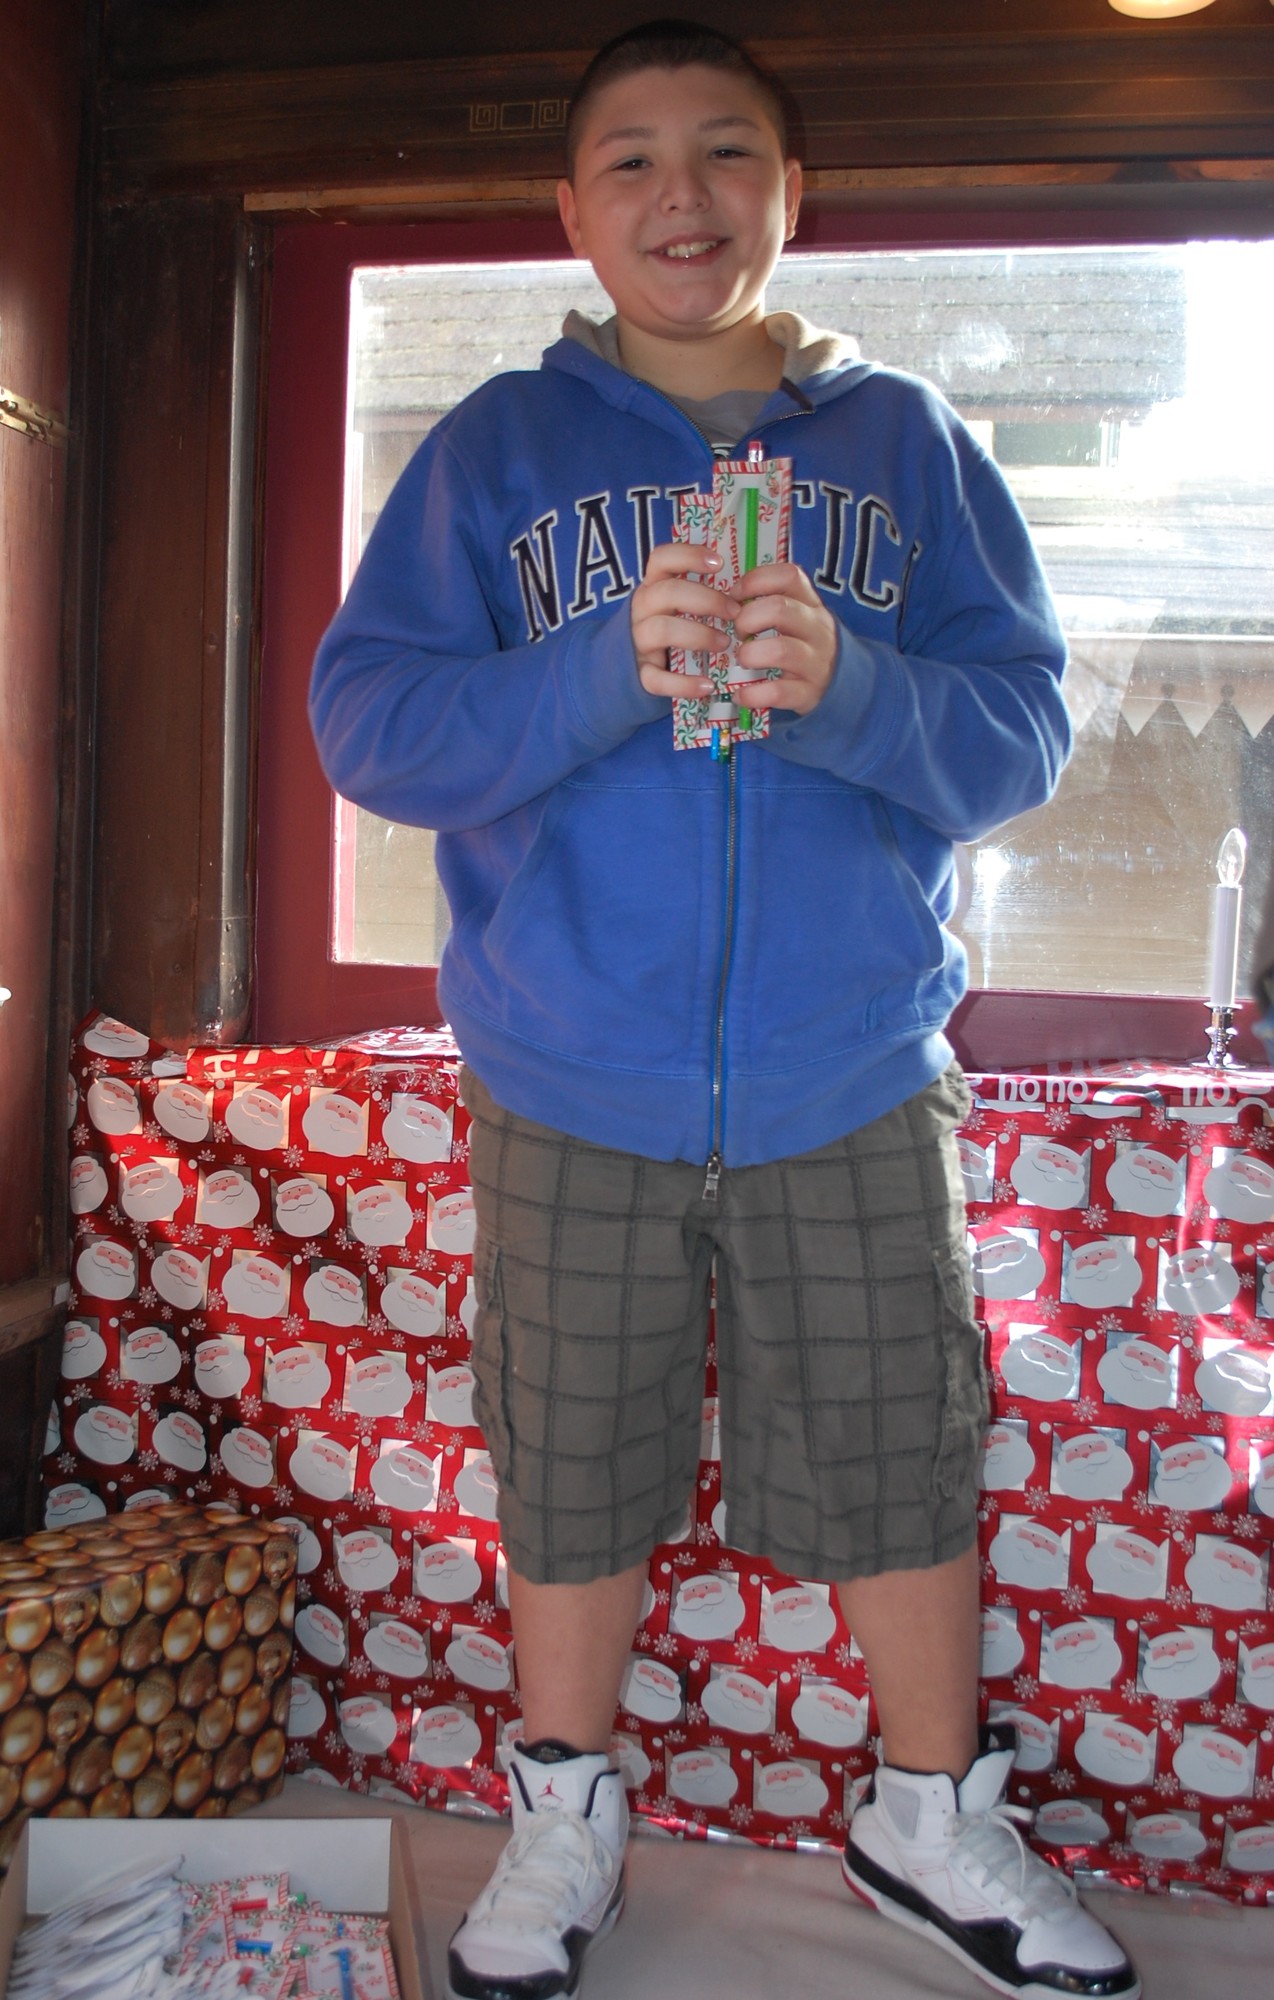 Thomas Dafnos, 12, handed out gifts to all of the visitors.